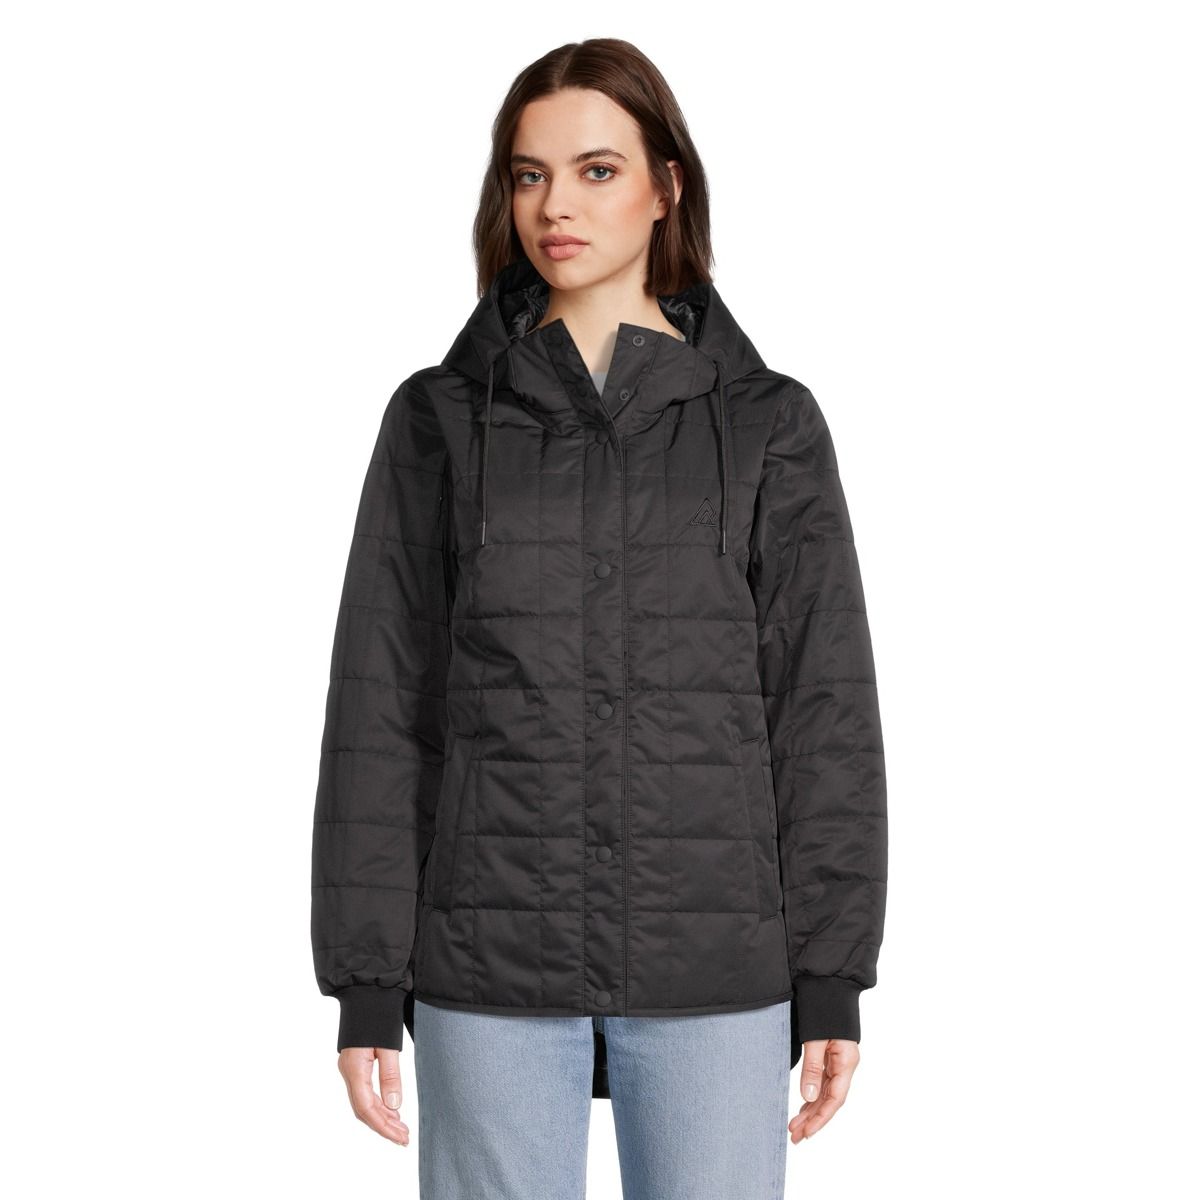 Ripzone Women's District Reversible Insulated Jacket | Sportchek